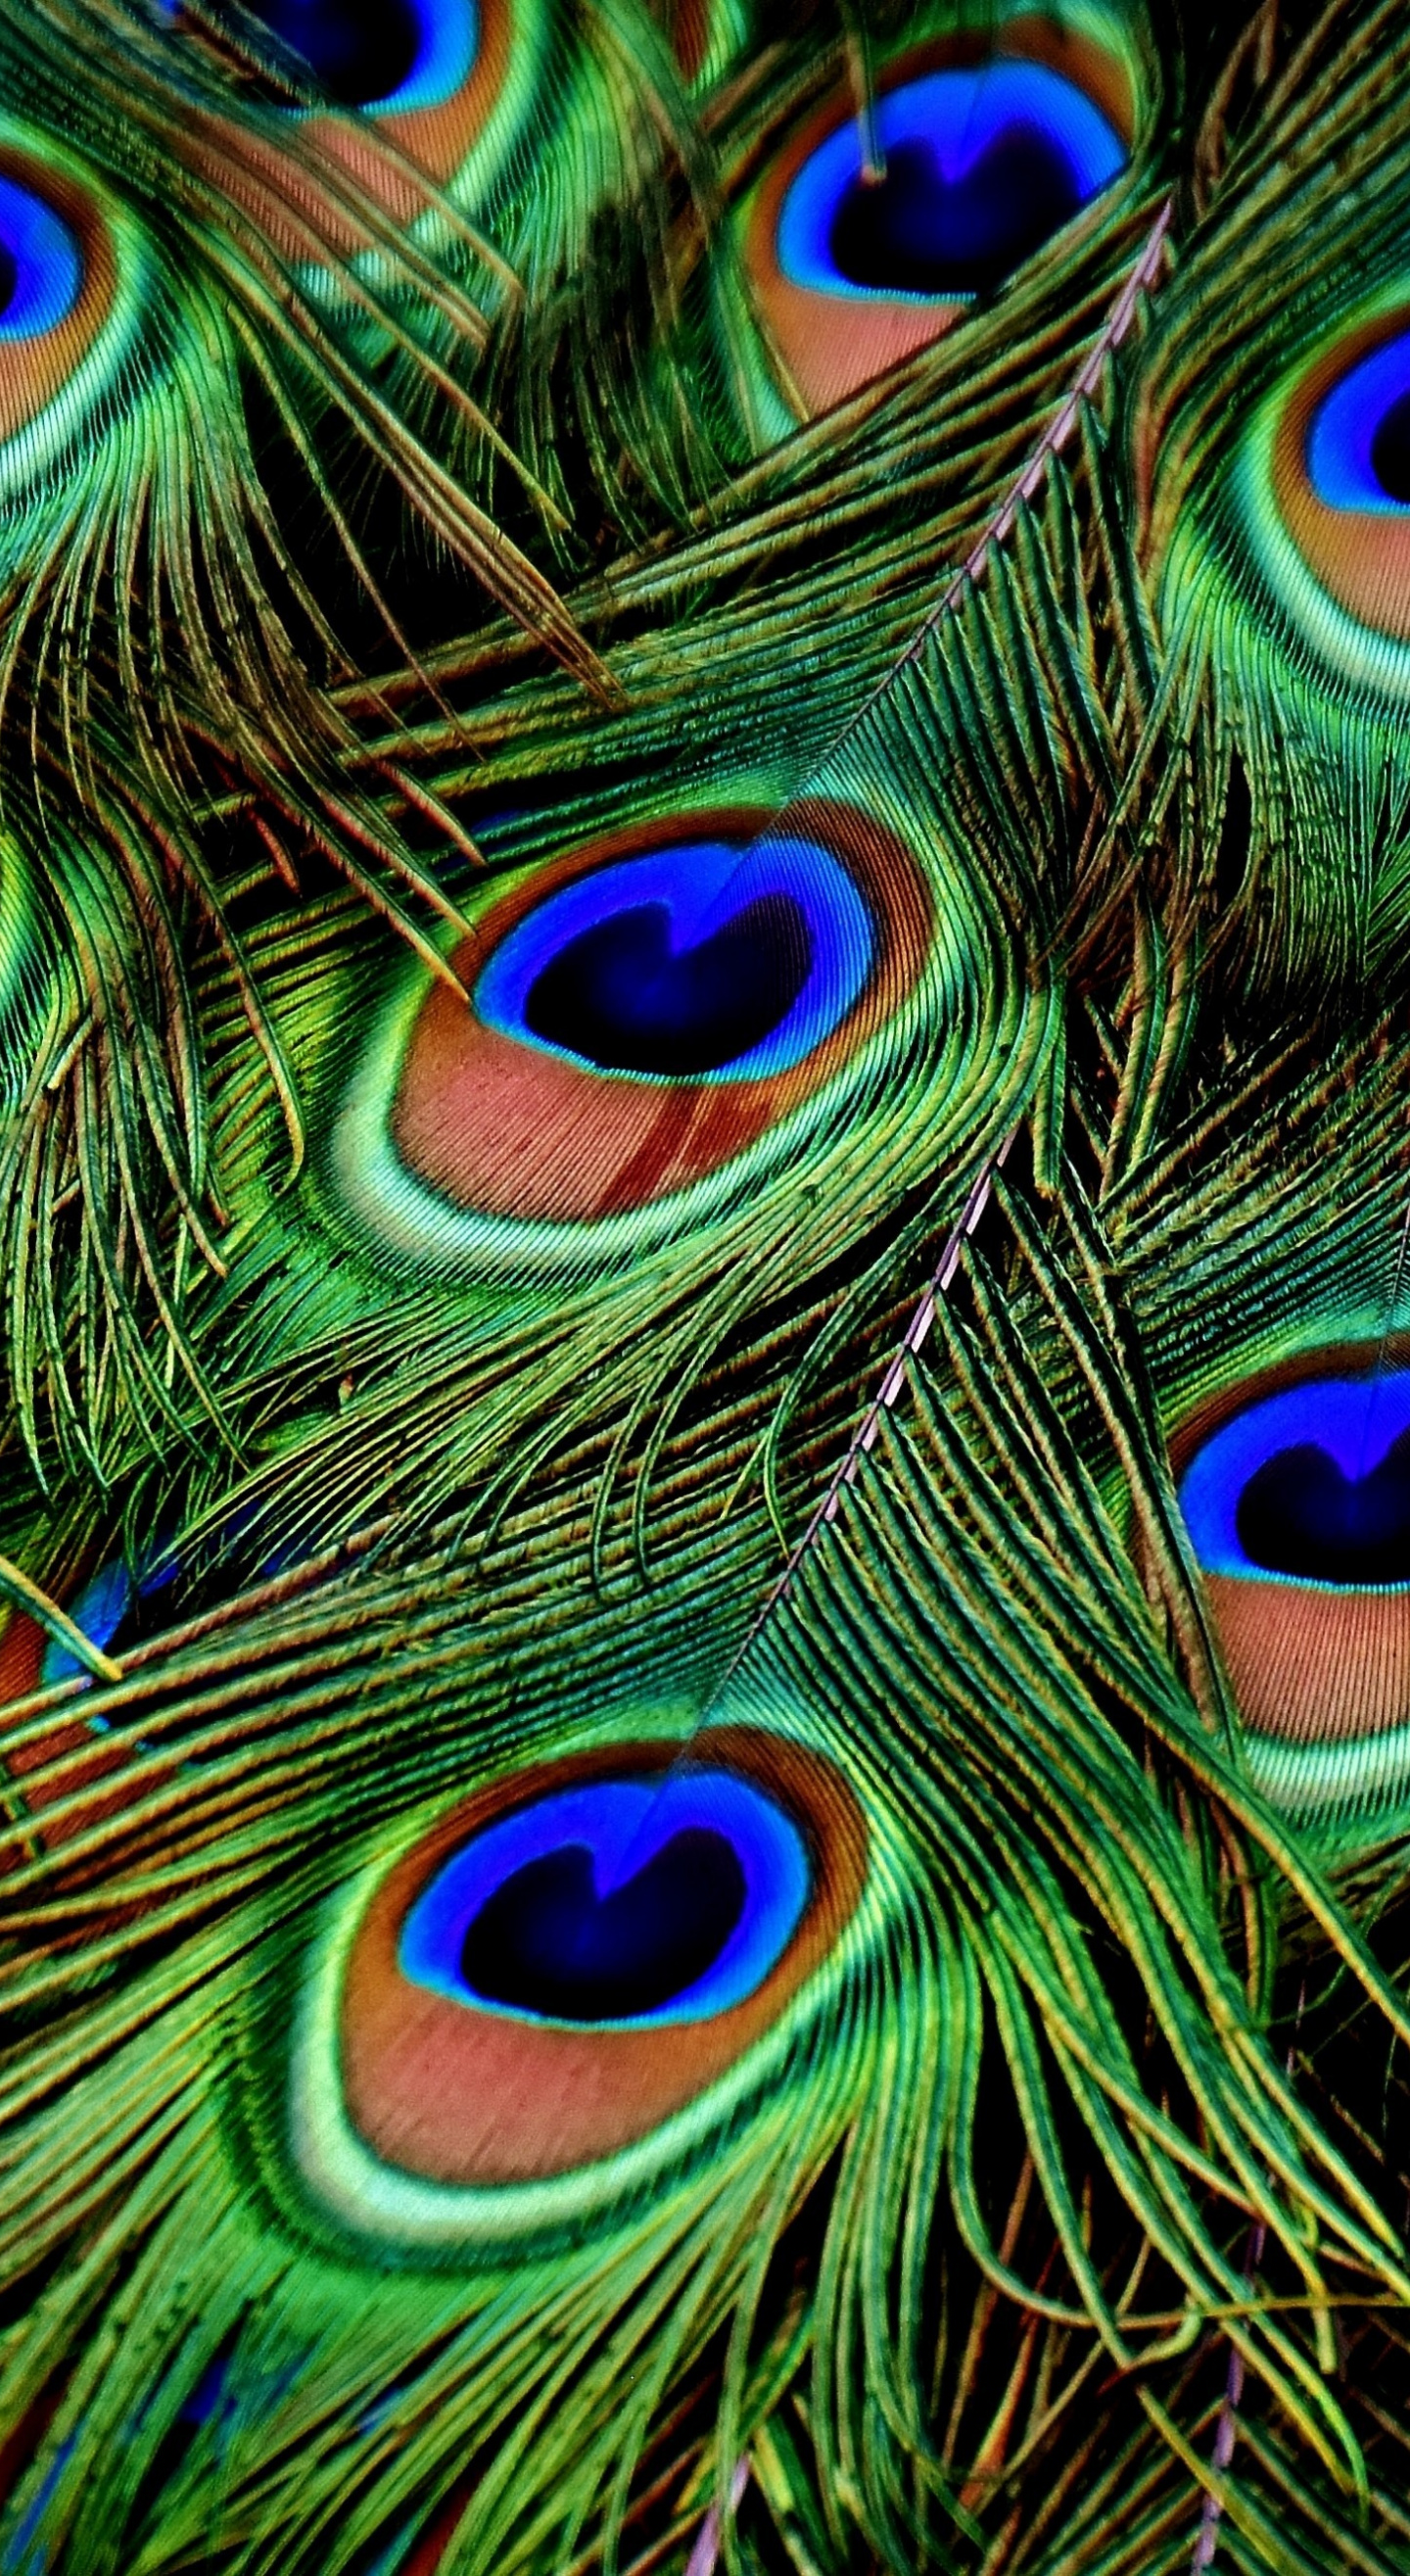 Peacock, Feathers, Colorful, Plumage, Wallpaper - Peacock Feather